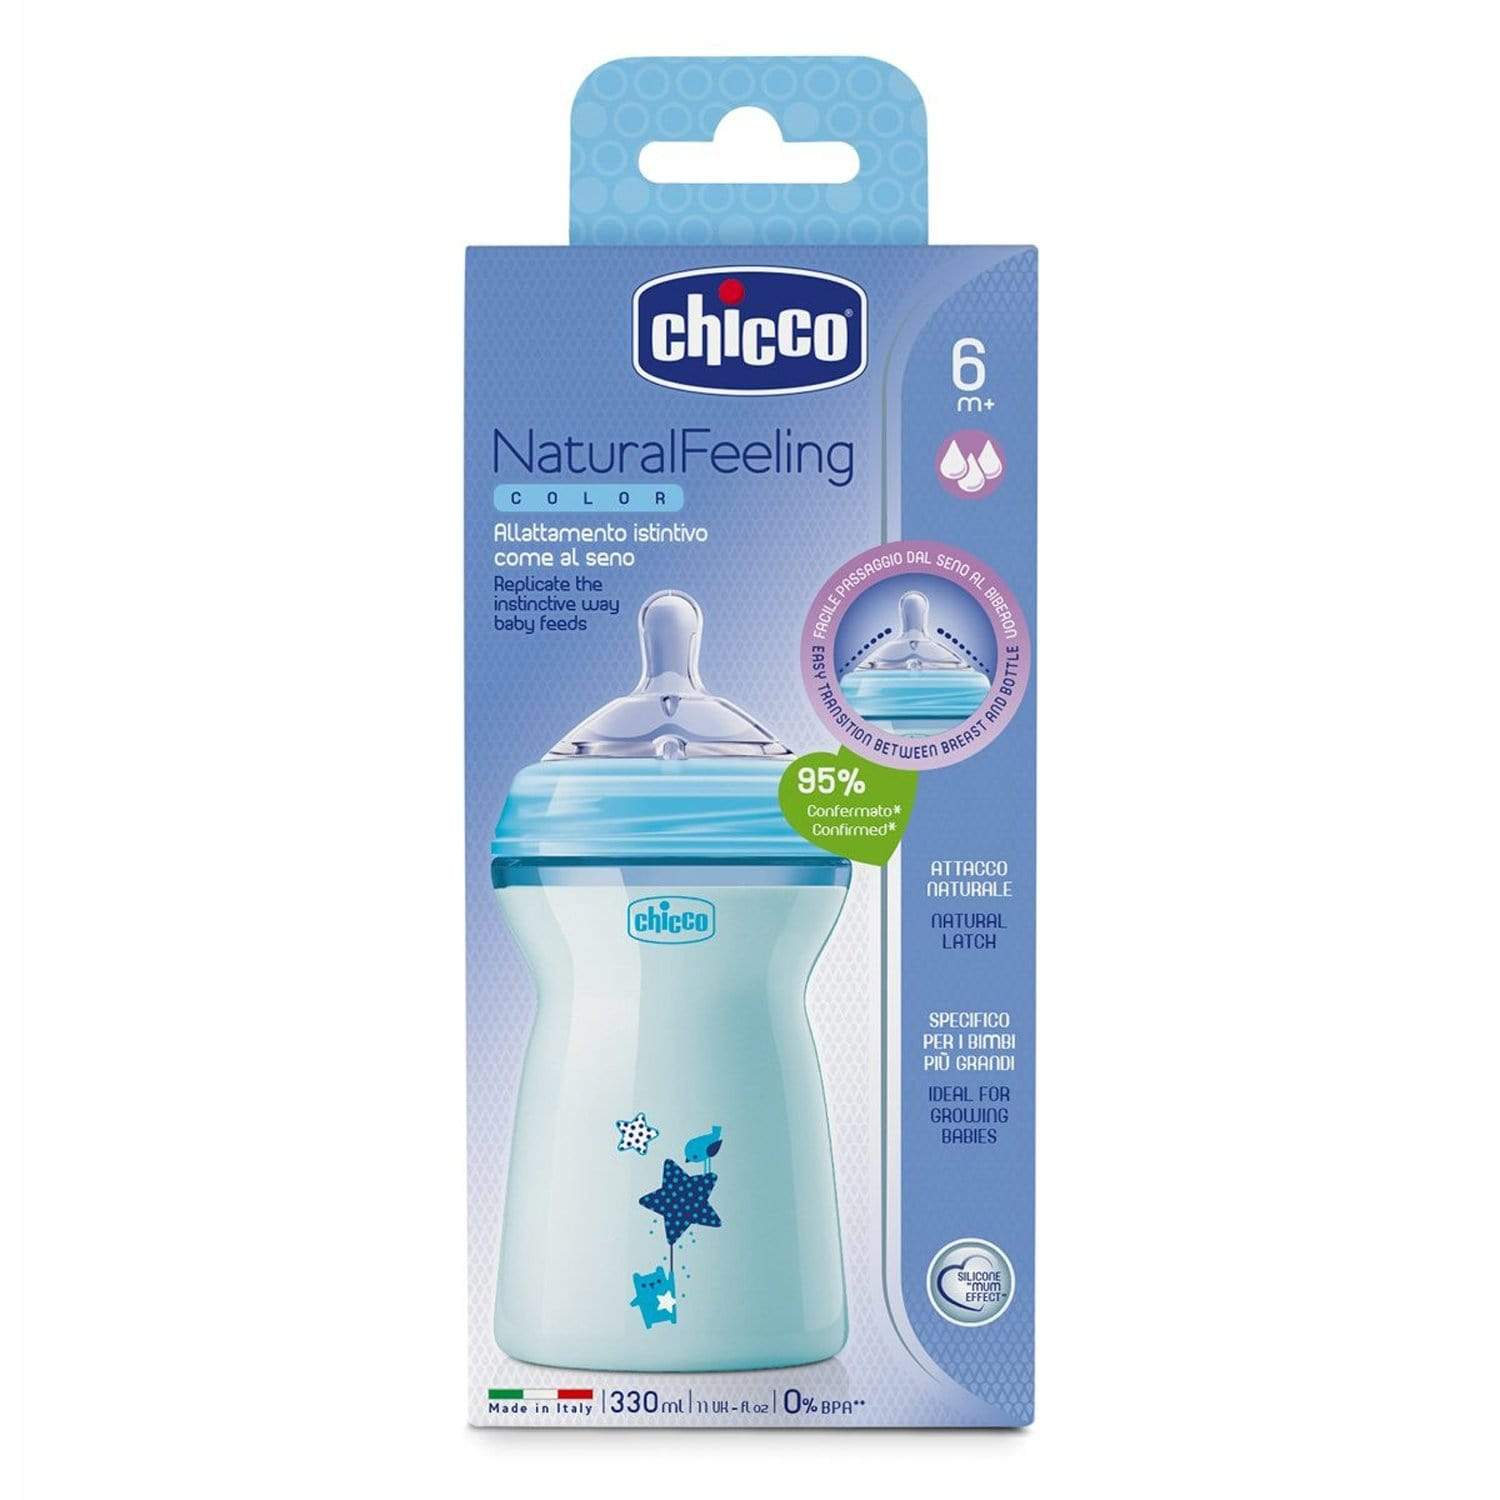 Chicco-Natural-Feeling-Feeding-Bottle-for-6-Months-and-Above-Baby-330ml-Light-Blue-CH80837-21